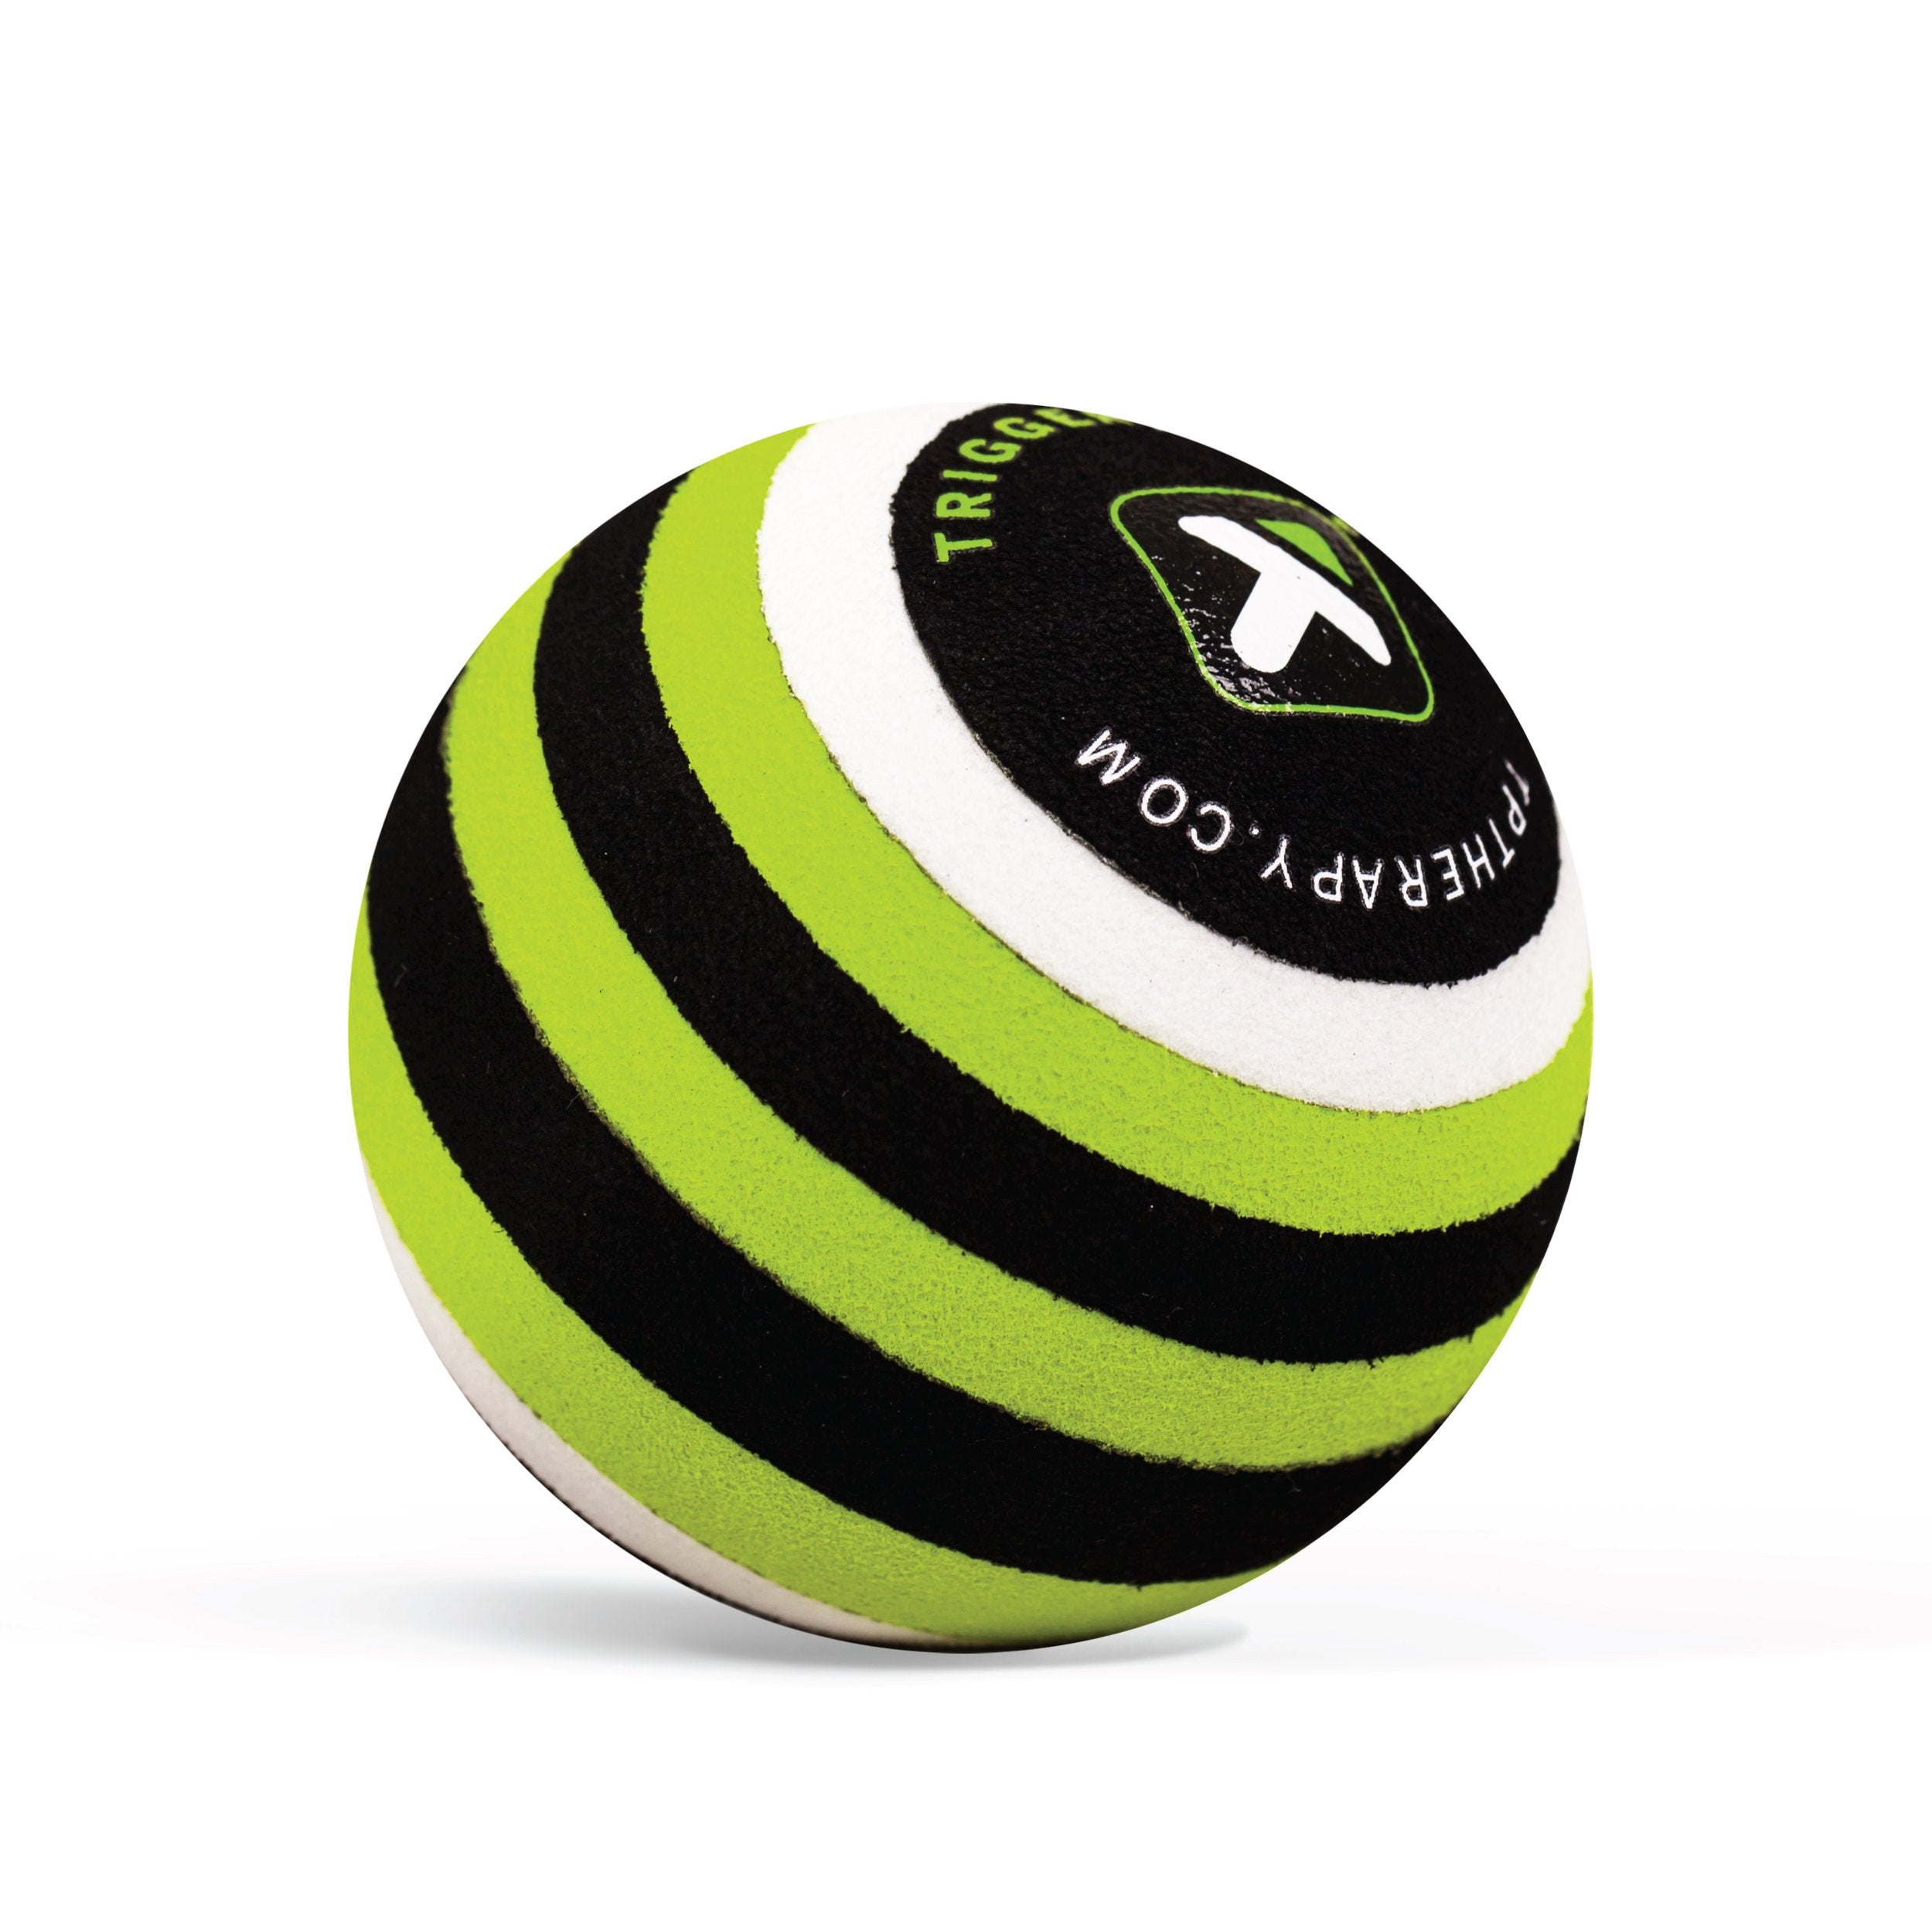 Trigger Point Performance Unisex's MB1, Deep Tissue Massage Ball for Back, Green, White and Black, 2.6''/5cm